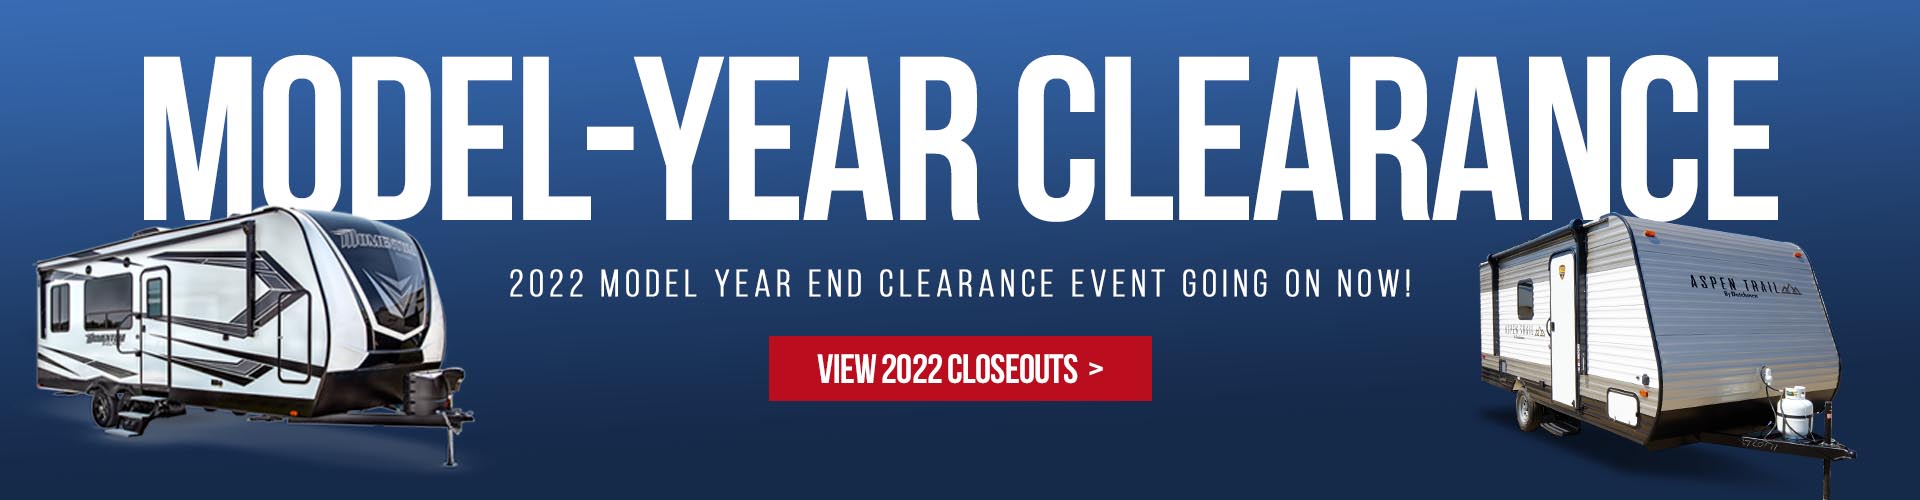 2022 Model Year End Clearance Event